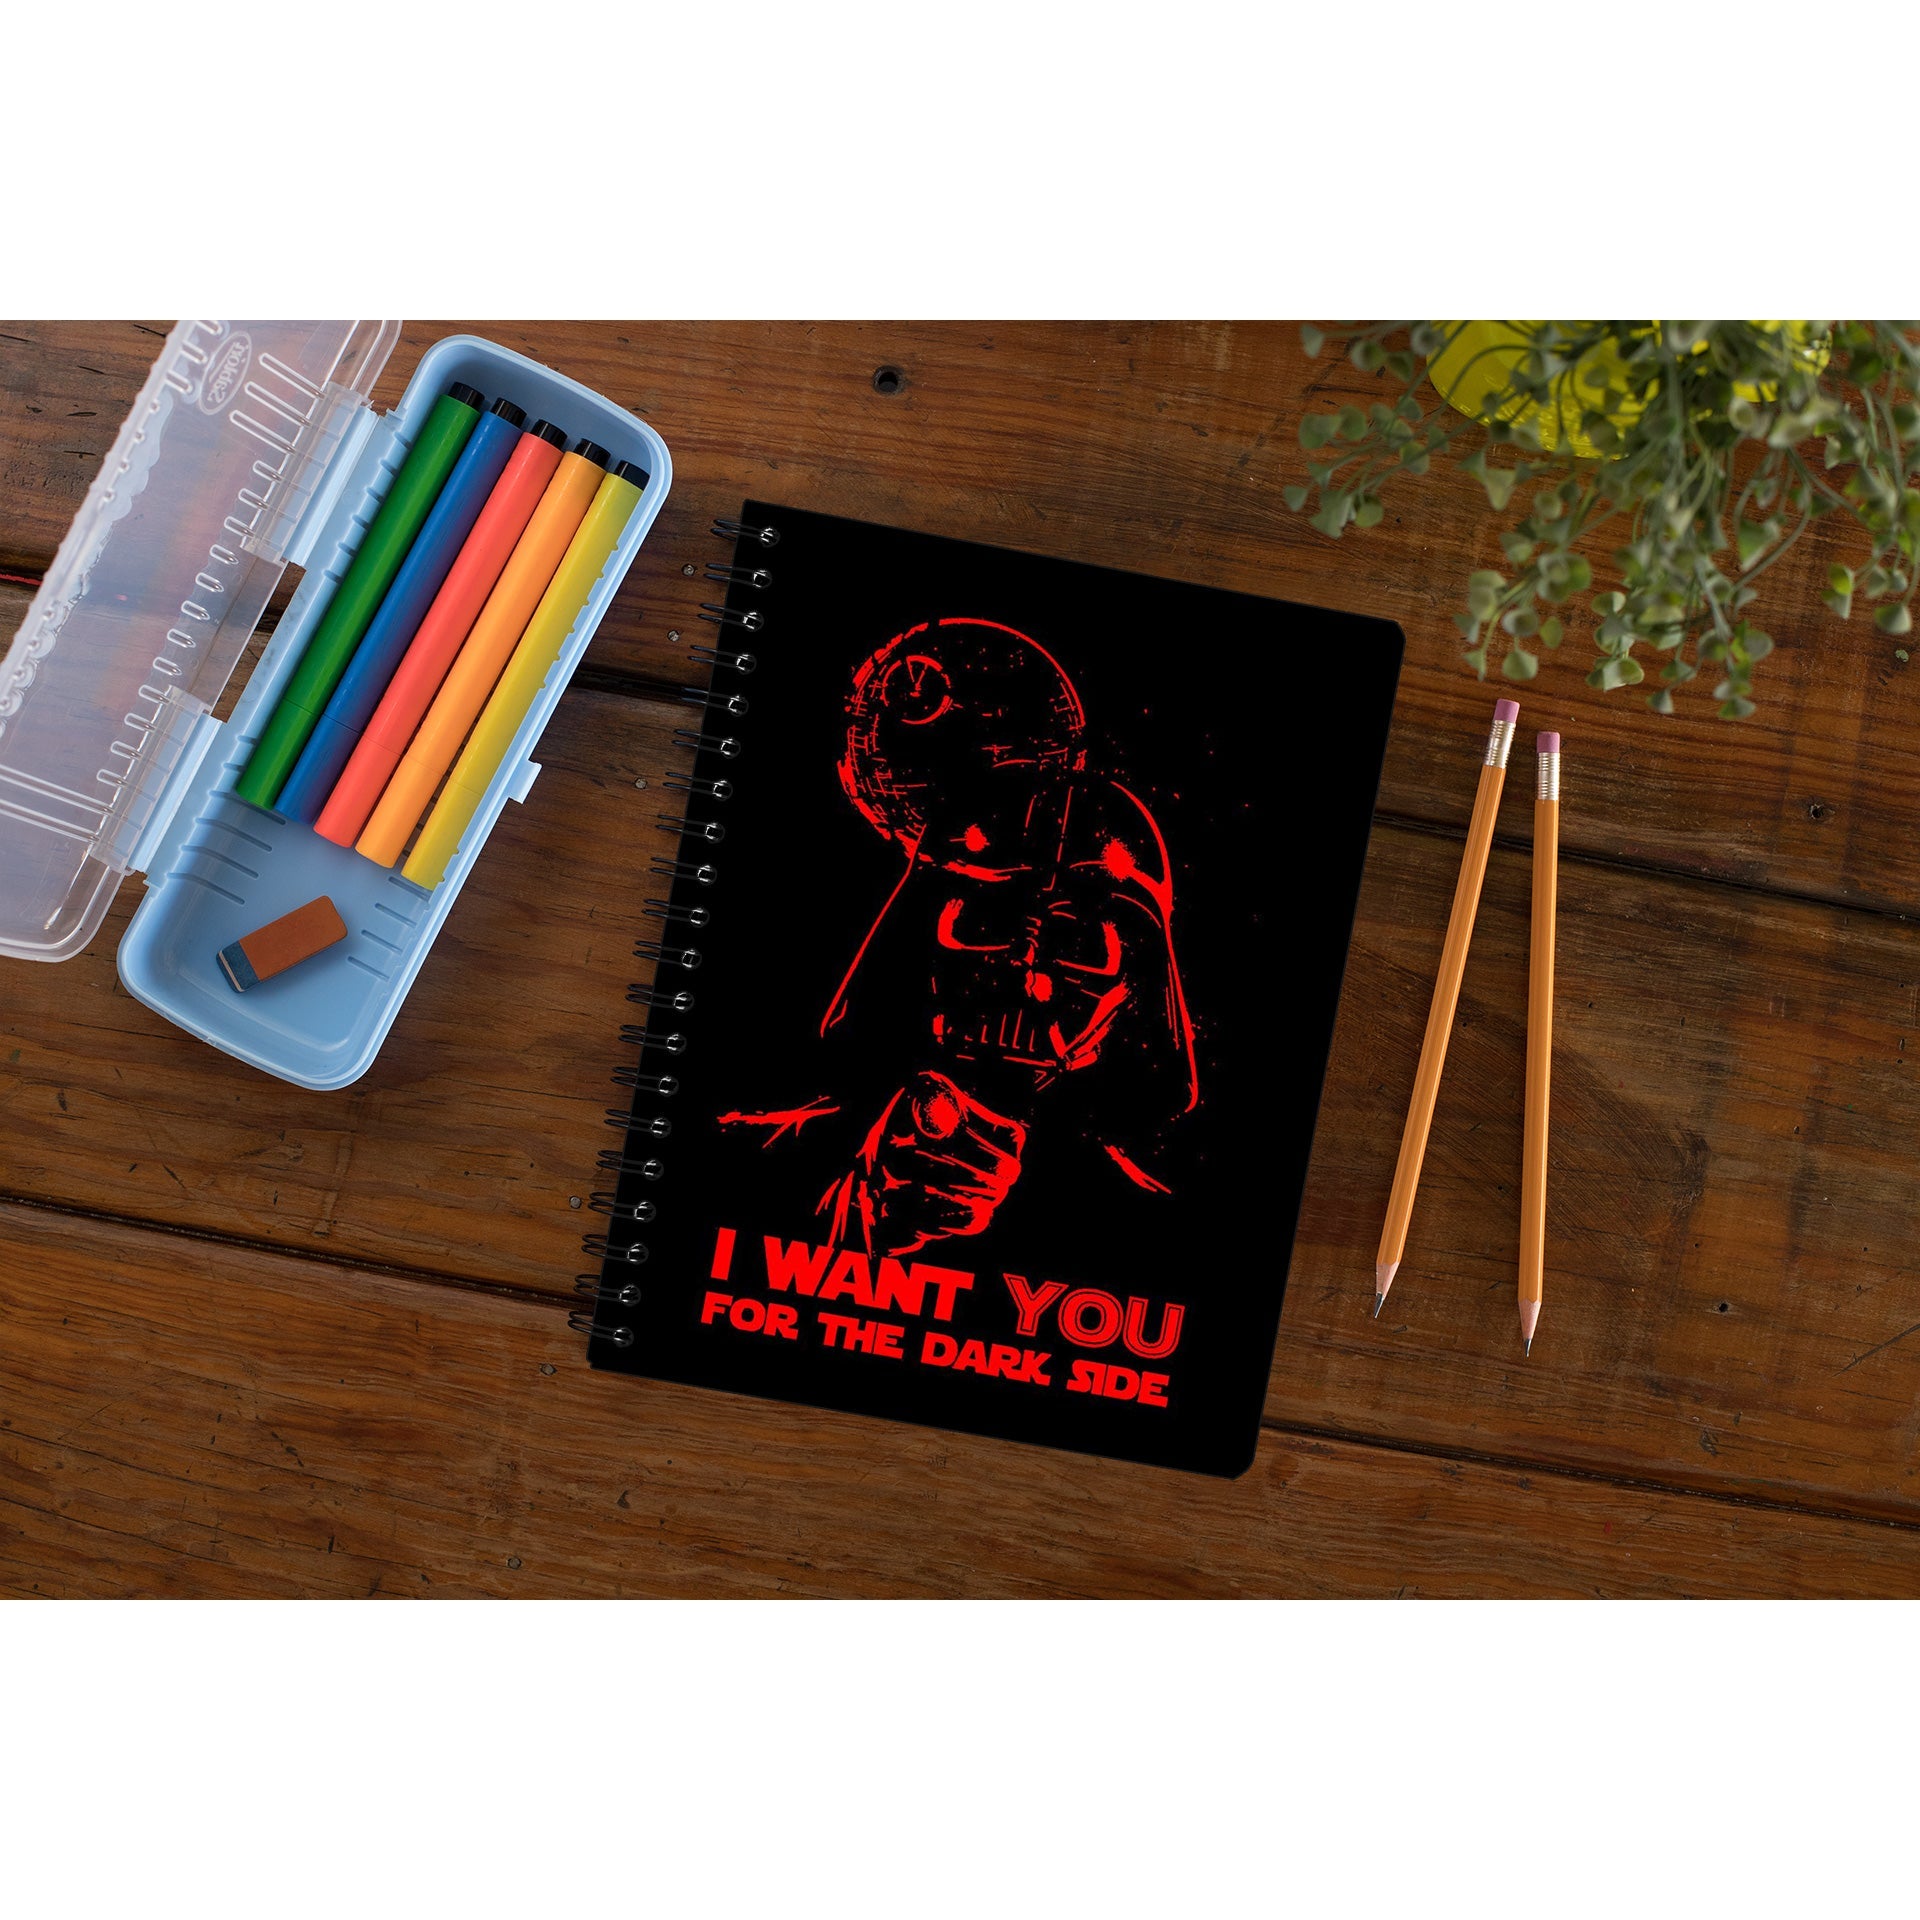 star wars i want you for the dark side notebook notepad diary buy online india the banyan tee tbt unruled darth vader